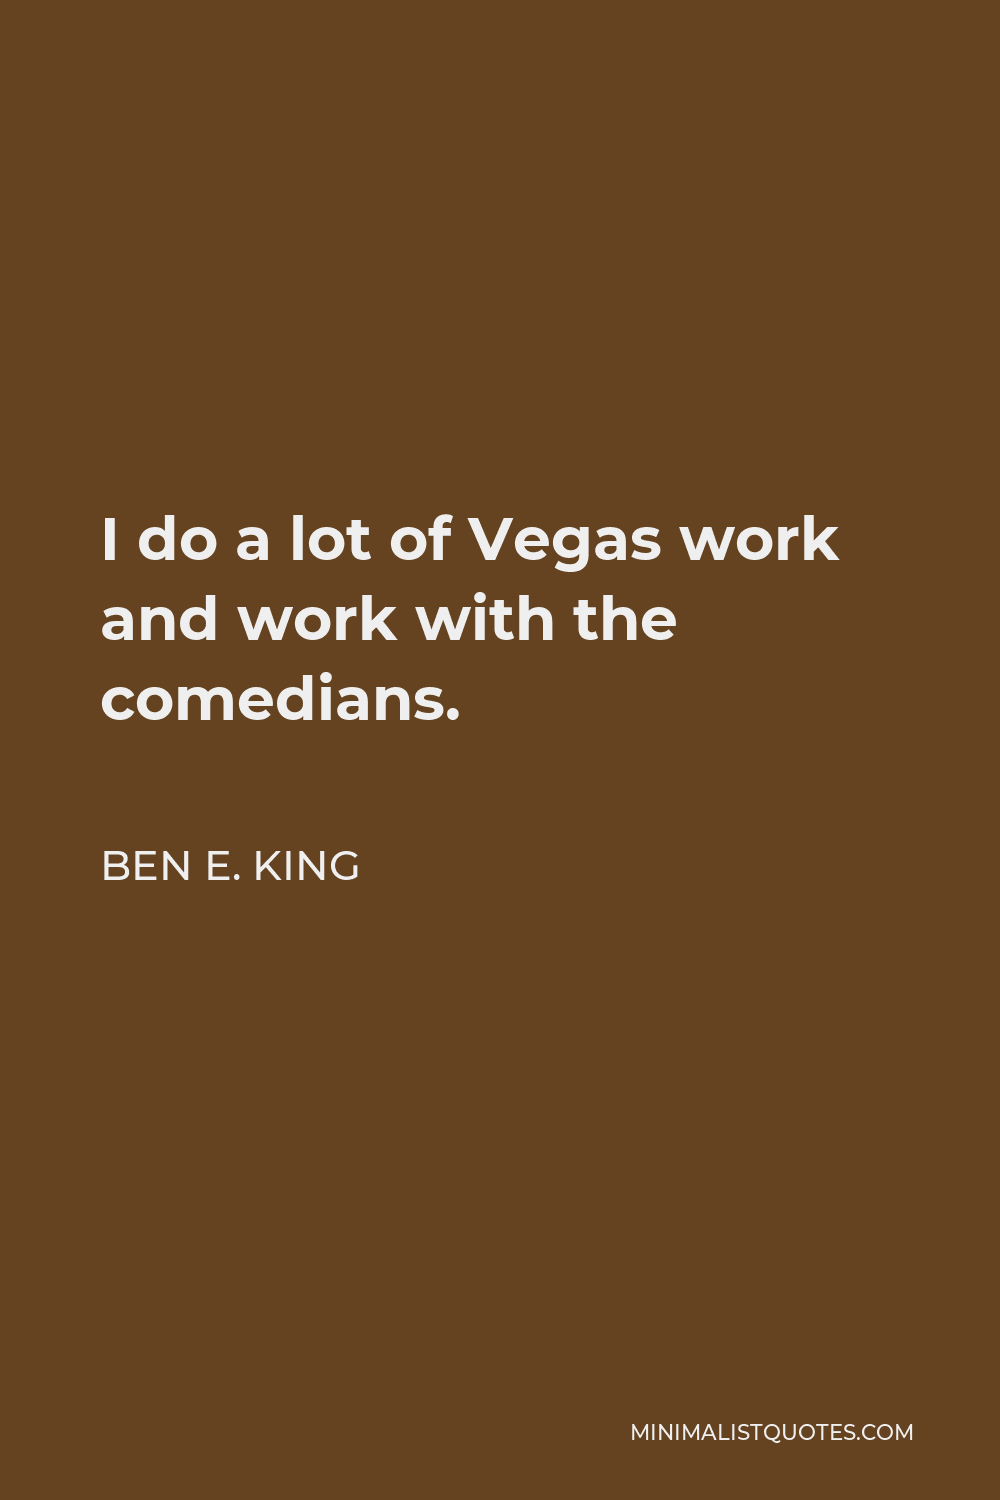 Ben E. King Quote - I do a lot of Vegas work and work with the comedians.